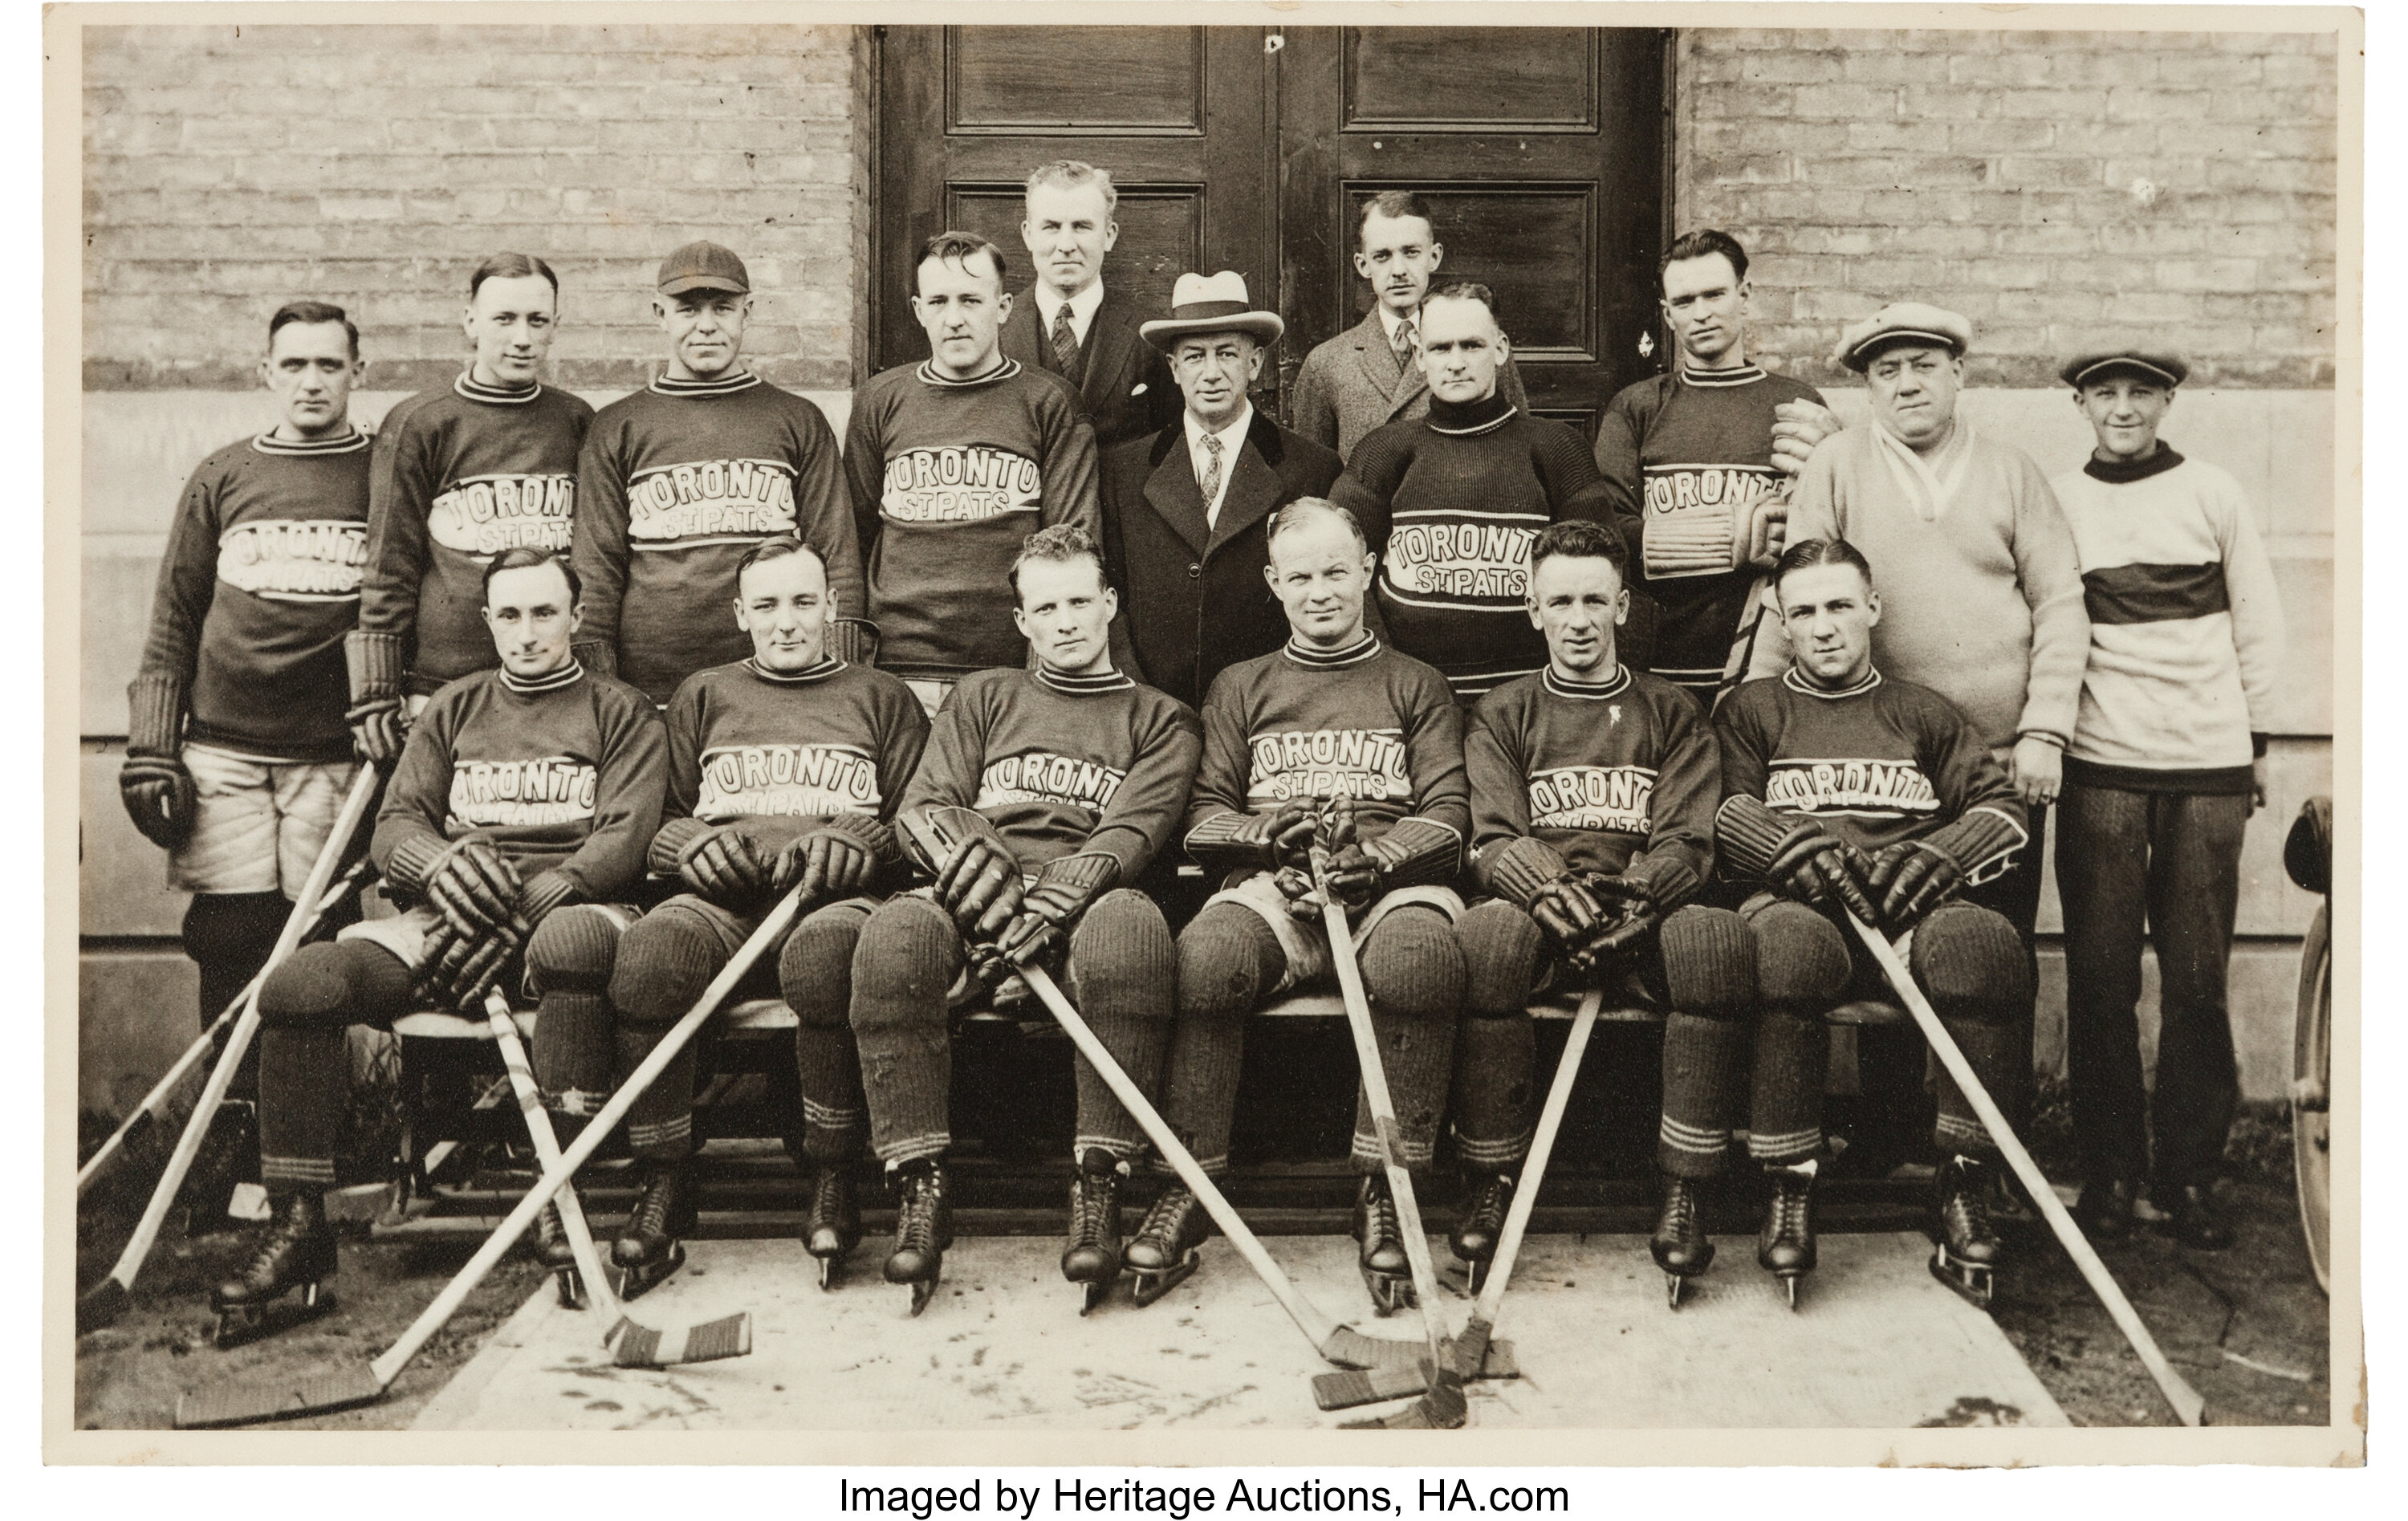 Bench Clearers - 🍀#tbt to the 1919 Toronto St Pats team